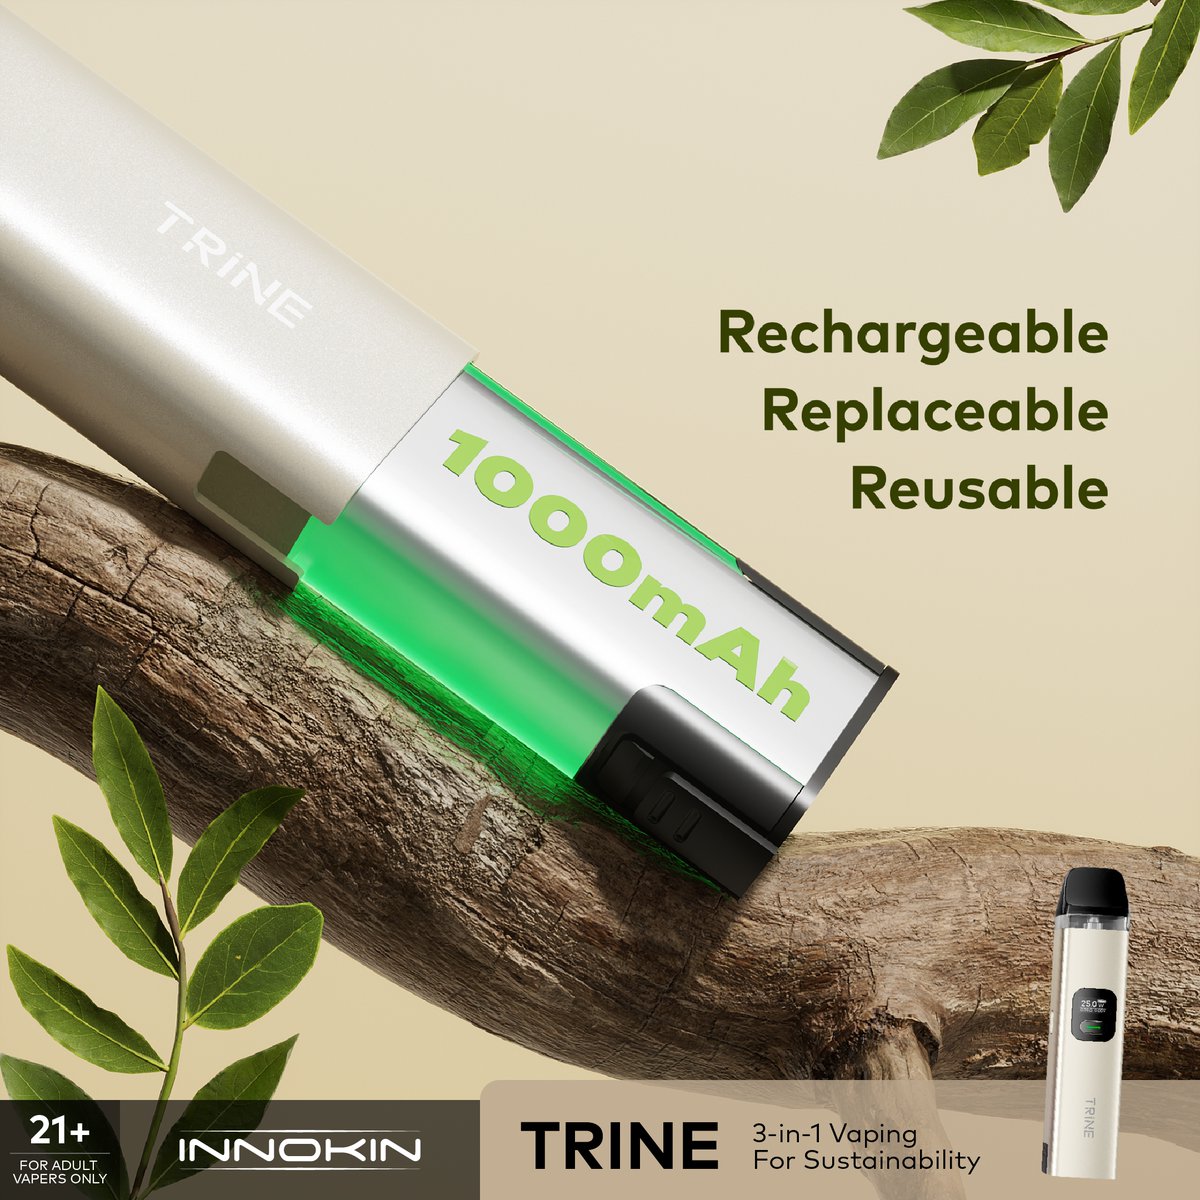 Swap Seamlessly, Puff Endlessly! 🔋💨 ⚡ Charge via Type-C or effortlessly swap between 𝟭𝟬𝟬𝟬𝗺𝗔𝗵 batteries for extended runtime!♻️Our 𝑬𝒄𝒐𝑫𝒓𝒂𝒊𝒏™ 𝒃𝒂𝒕𝒕𝒆𝒓𝒚 𝒅𝒊𝒔𝒄𝒉𝒂𝒓𝒈𝒆 𝒕𝒆𝒄𝒉𝒏𝒐𝒍𝒐𝒈𝒚 ensures a safer battery recycling. 18/21+ only #Innokin #Trine